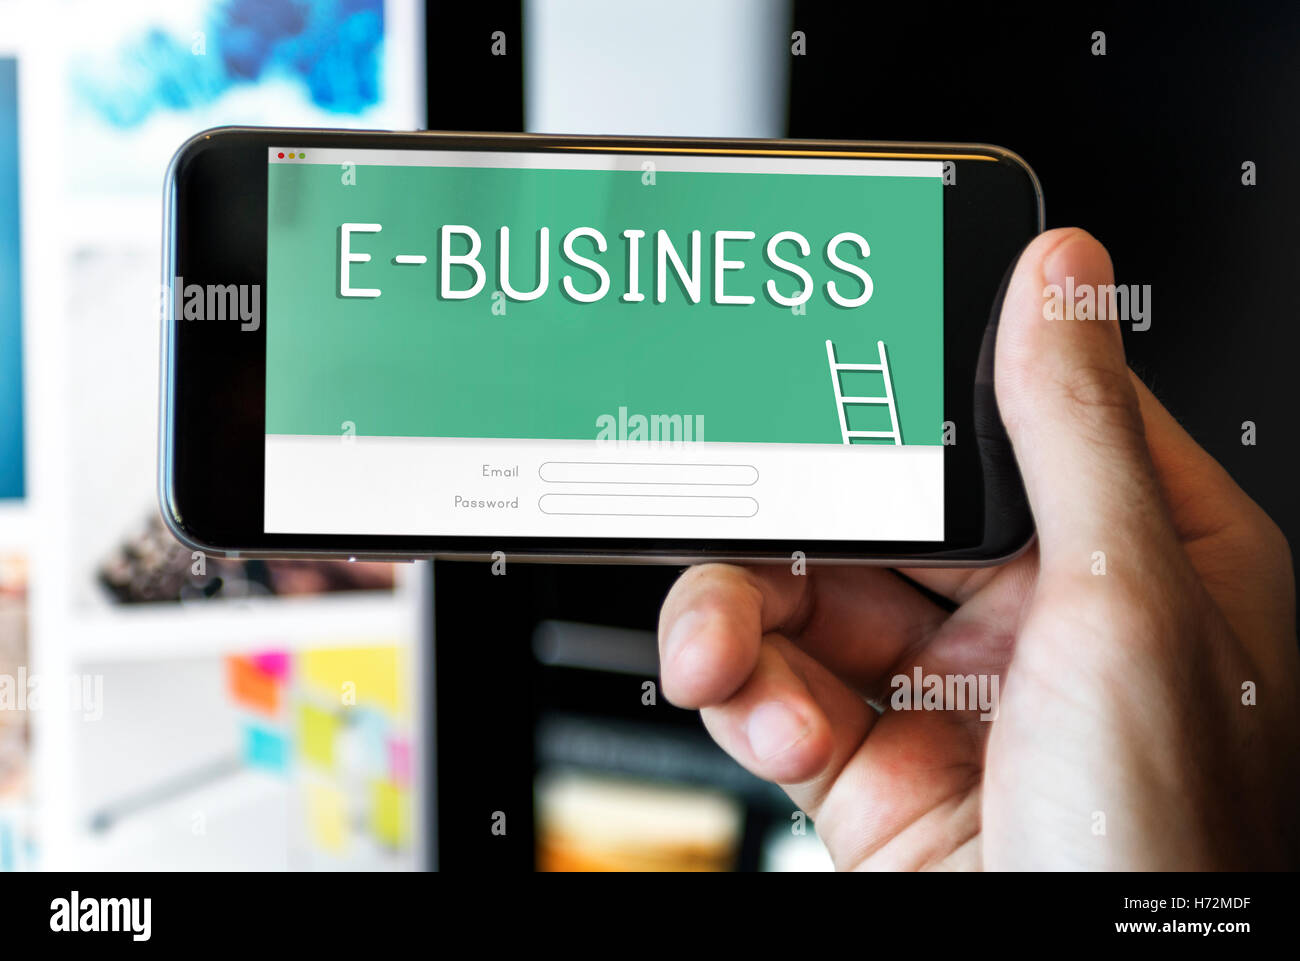 E-Business Online Banking Accounting Financial Concept Stock Photo